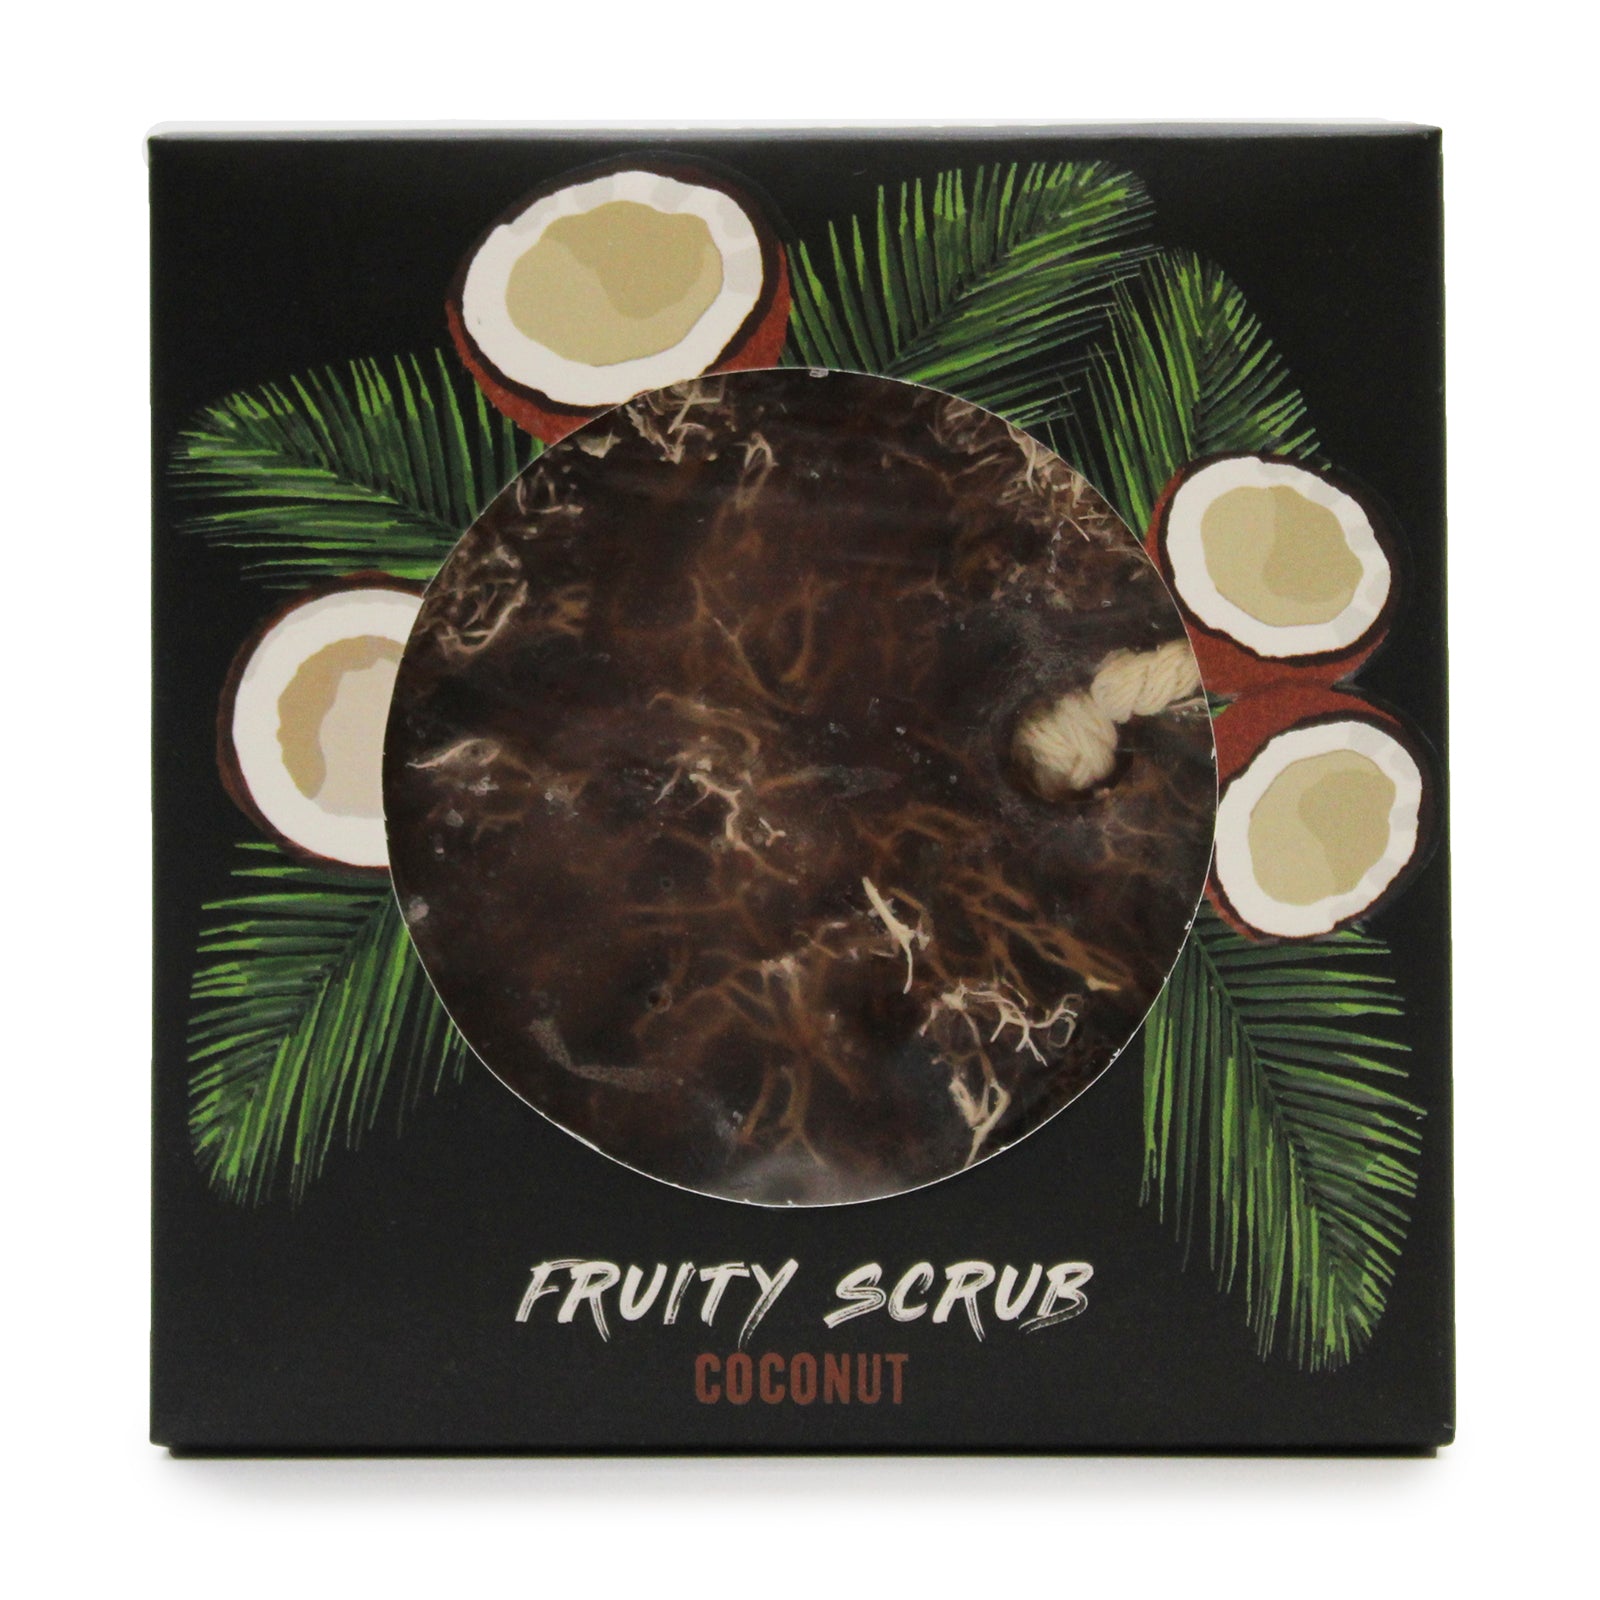 View Fruity Scrub Soap on a Rope Coconut information